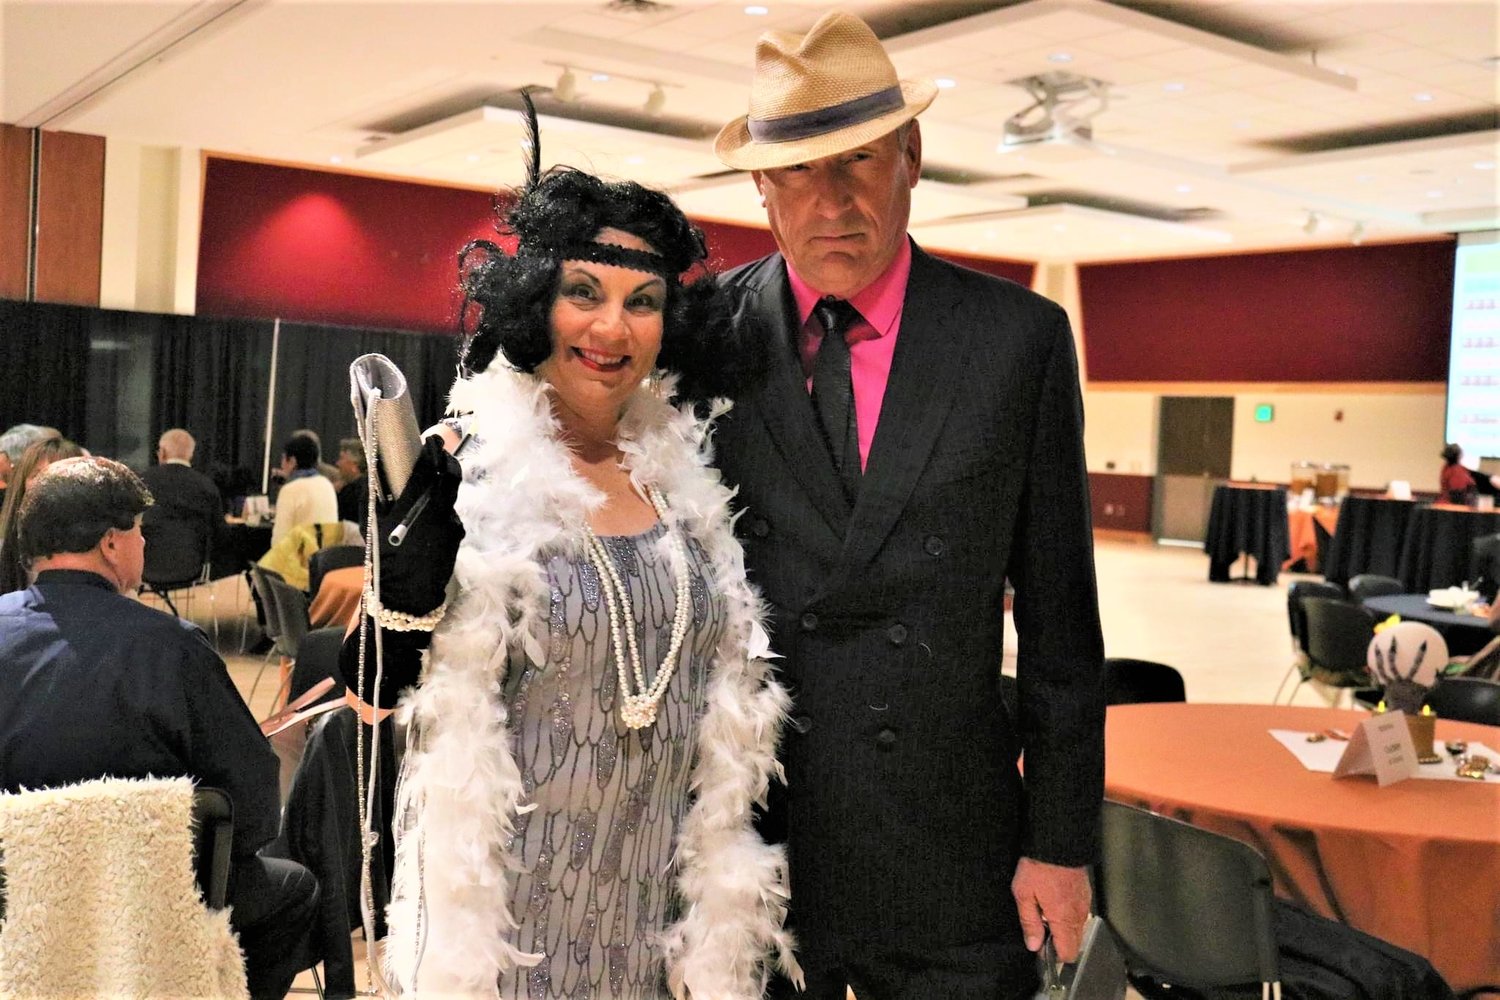 Las Cruces Mayor Pro Tempore Kasandra Gandara and state Sen. Bill Soules, D-Doña Ana, dressed up for a recent Celebrity Karaoke event.